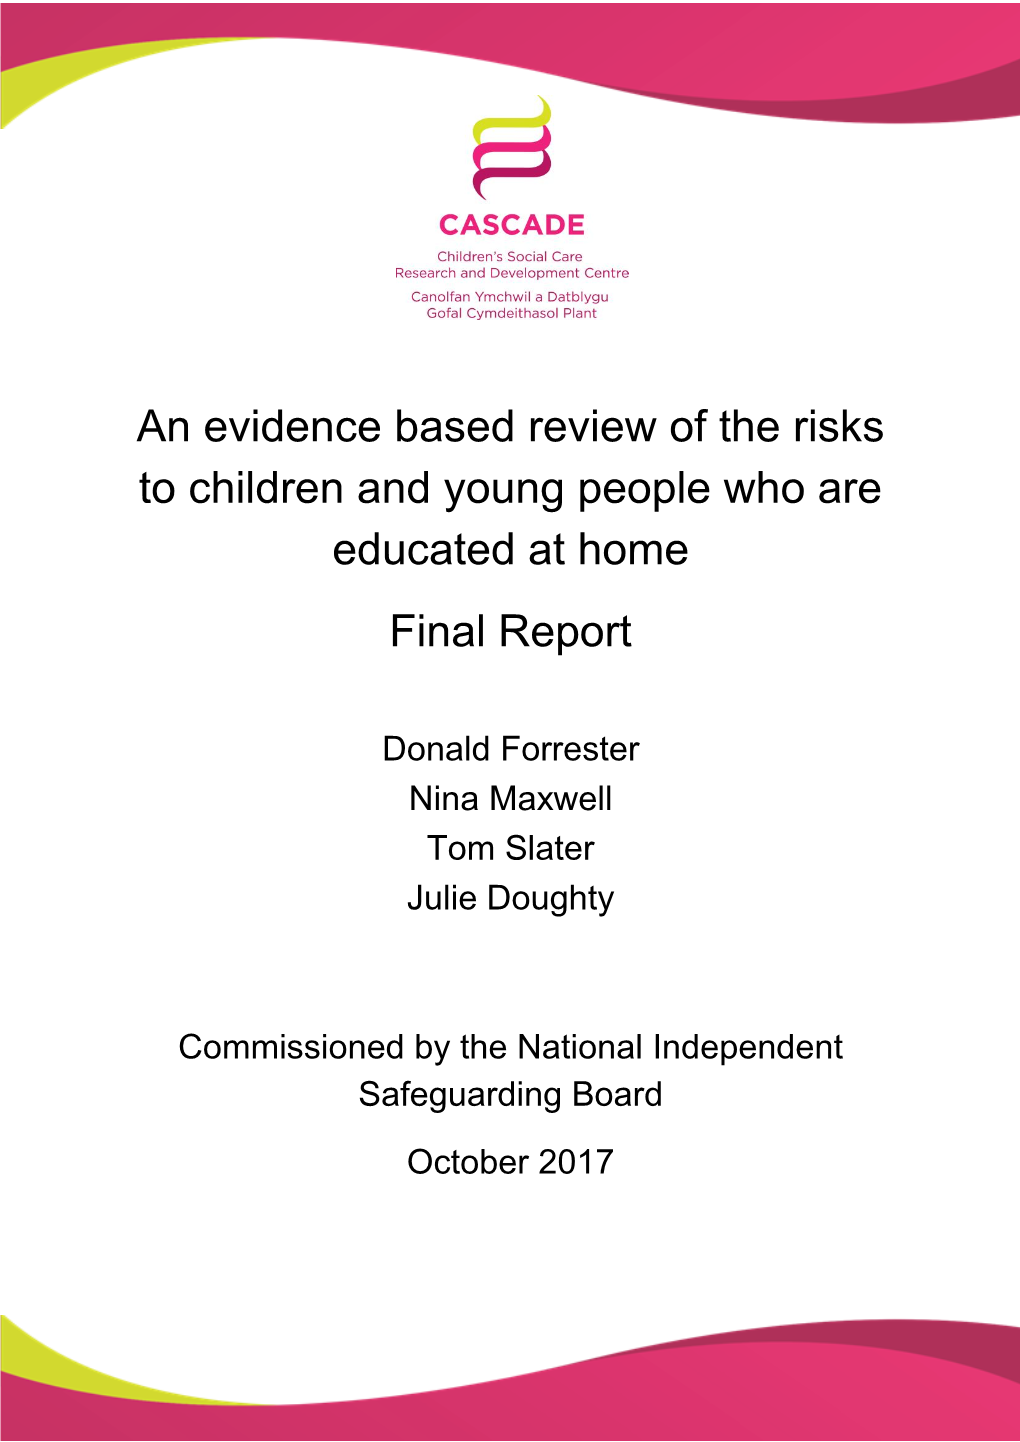 An Evidence Based Review of the Risks to Children and Young People Who Are Educated at Home Final Report